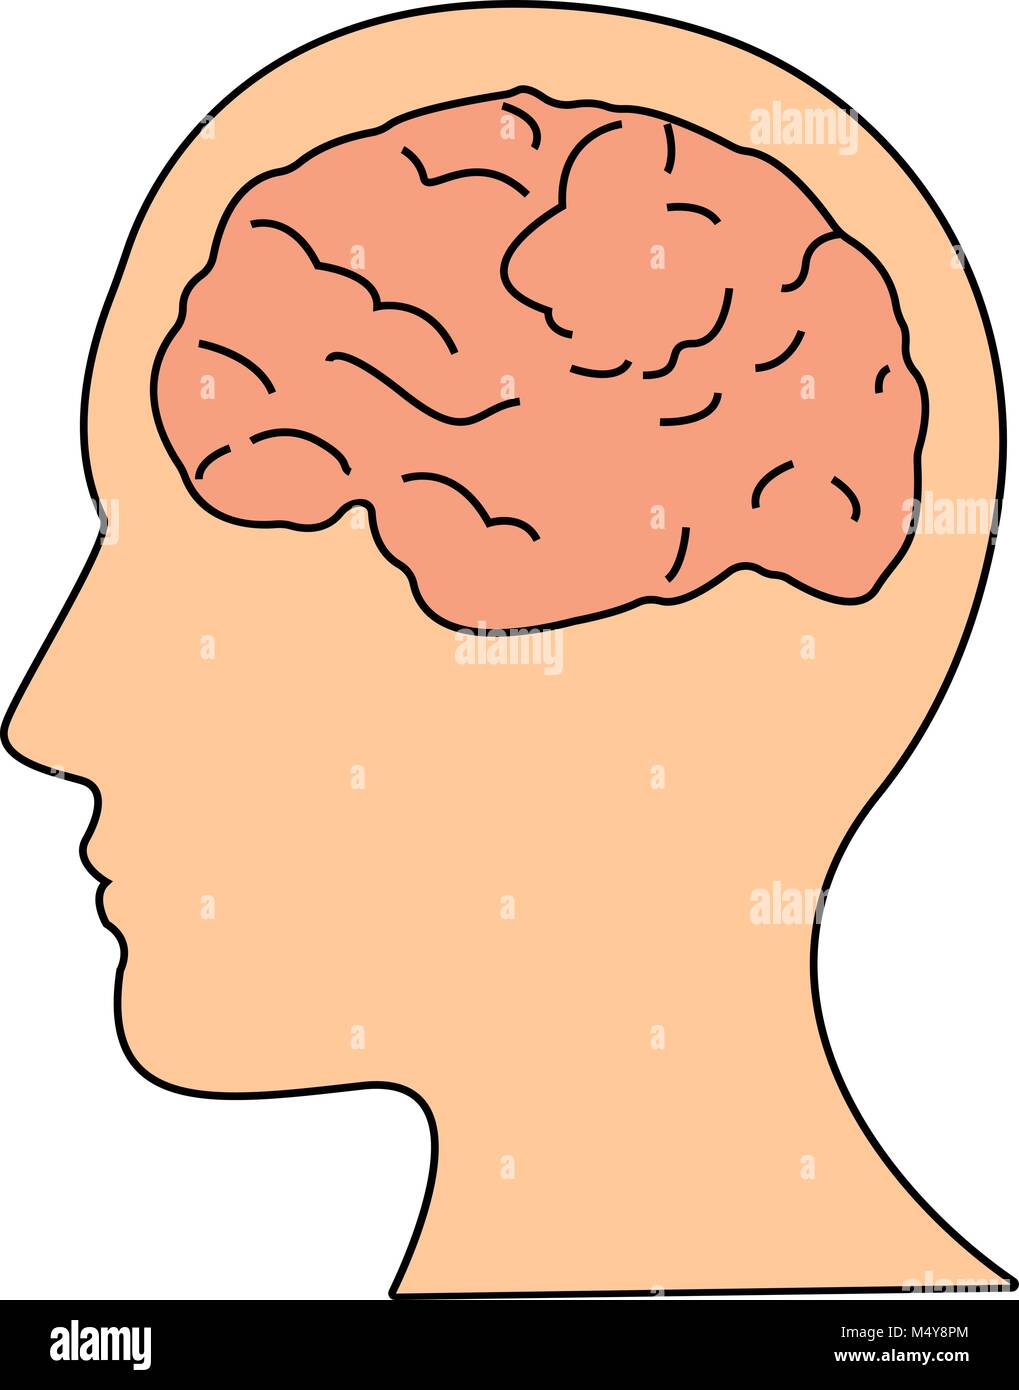 Brain or mind side view inside head line art vector icon for medical apps and websites Stock Vector